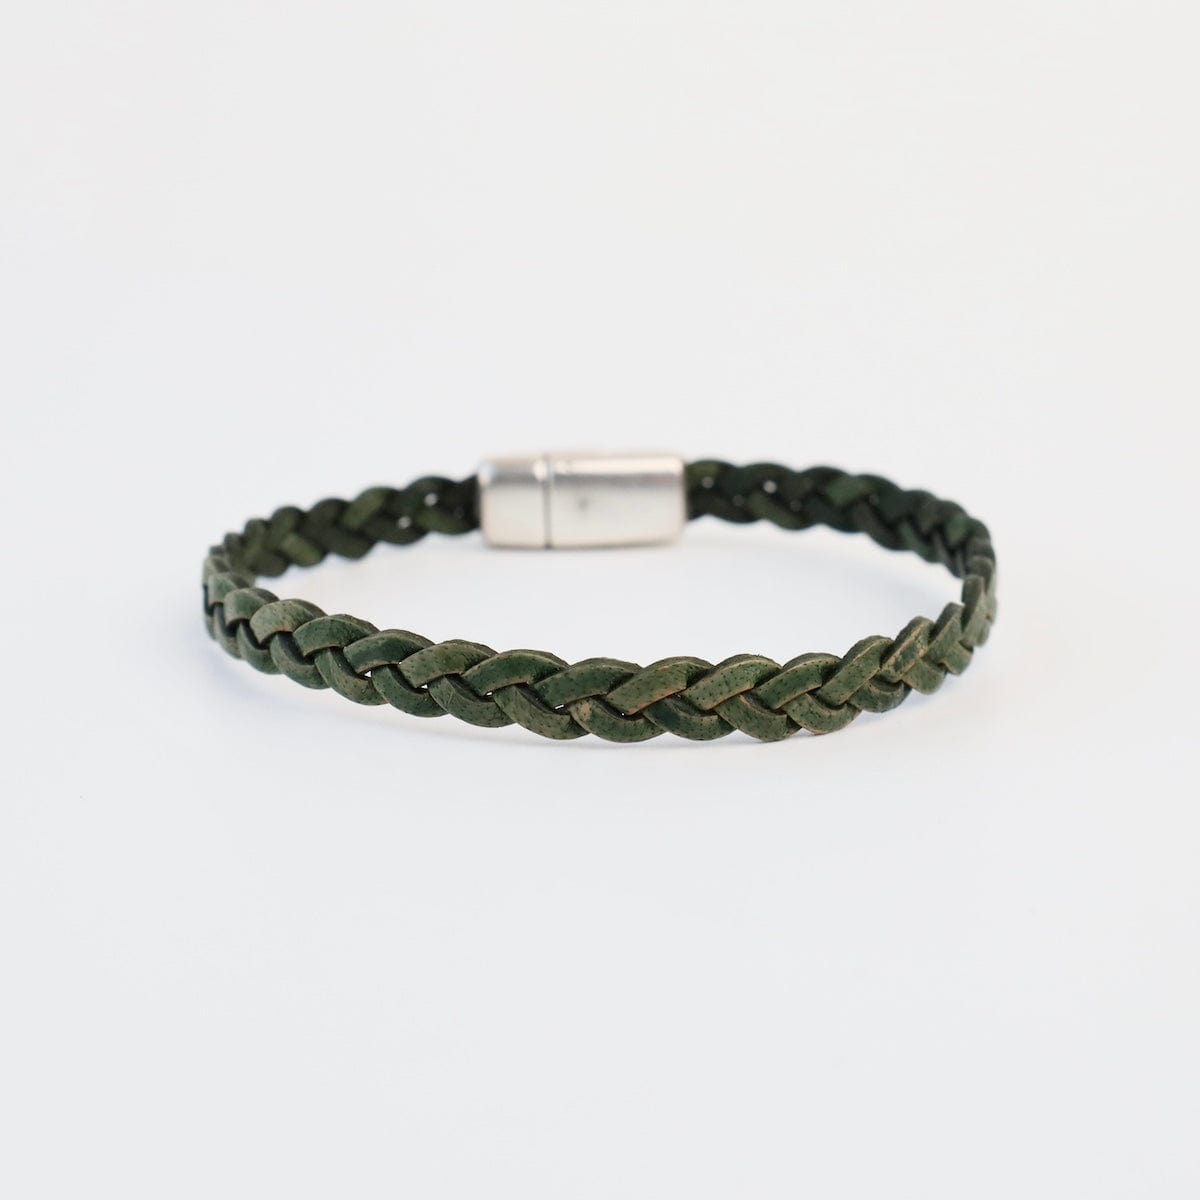 BRC Braided Green Leather Bracelet - approx 7.5"